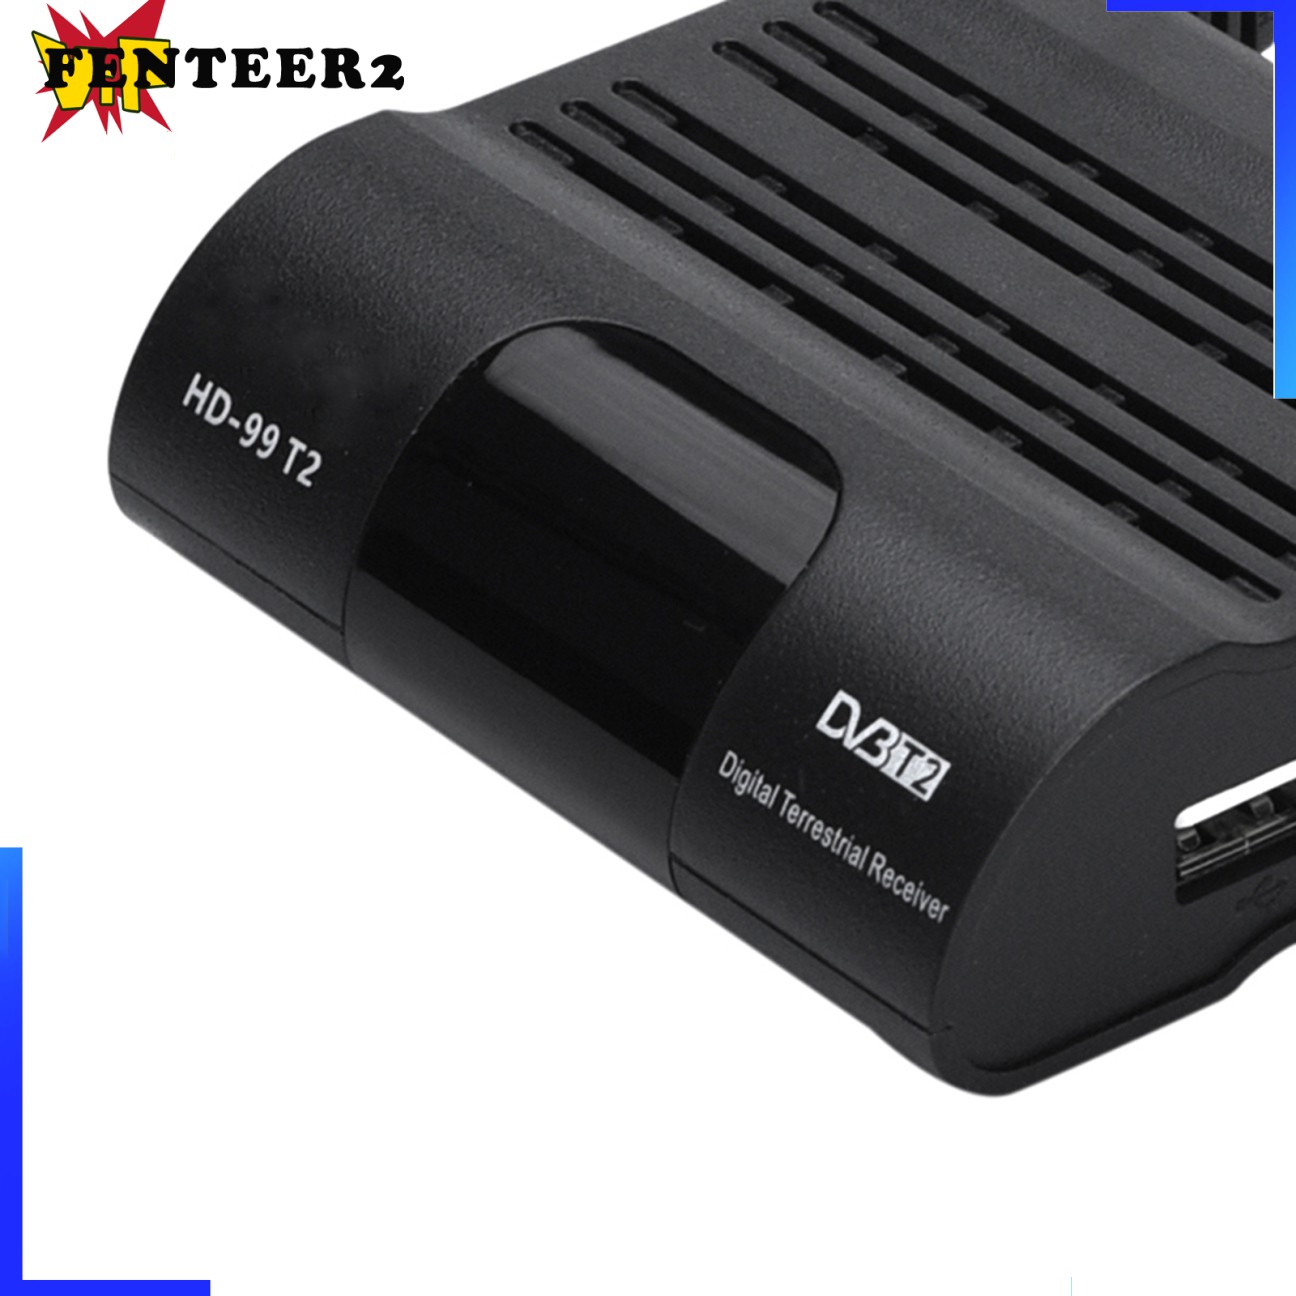 (fenteer2 3c) Bộ Hộp Wifi Ethernet Usb 2.0 Ultra Hd Android 10.0